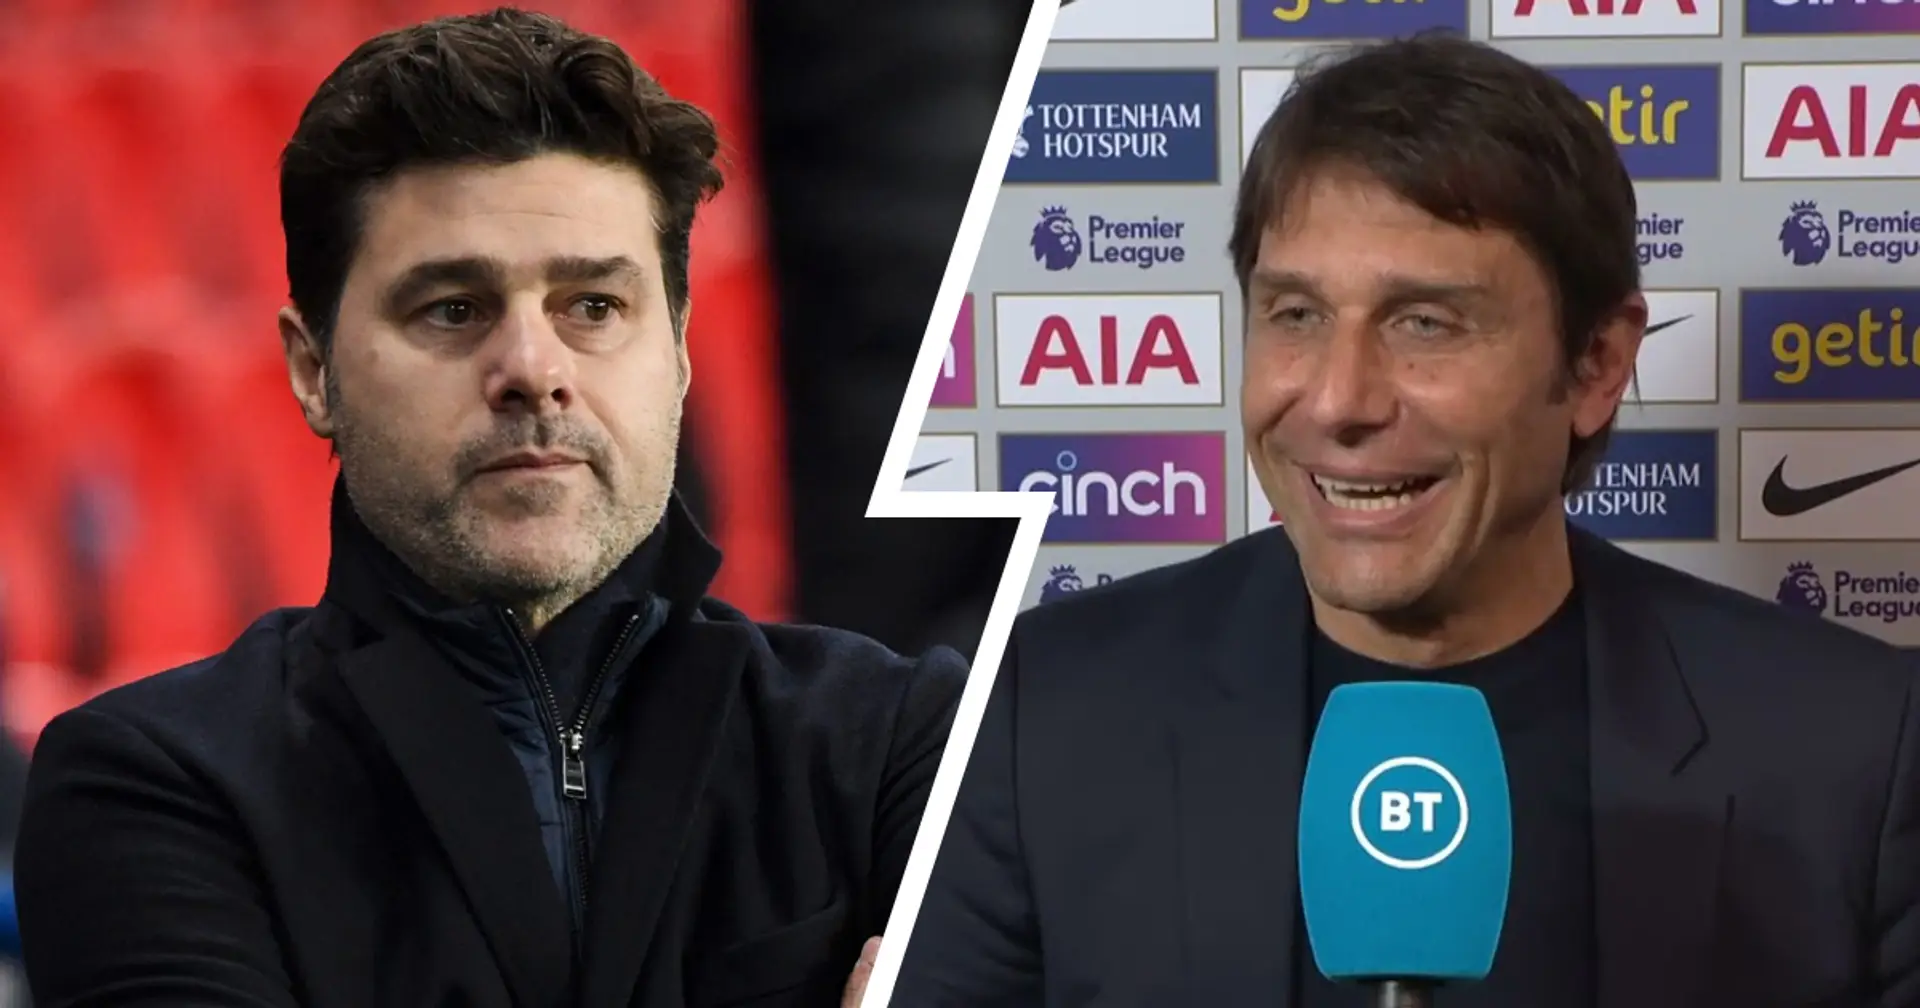 PSG have 3 candidates to replace Mauricio Pochettino as manager, Antonio Conte on the list